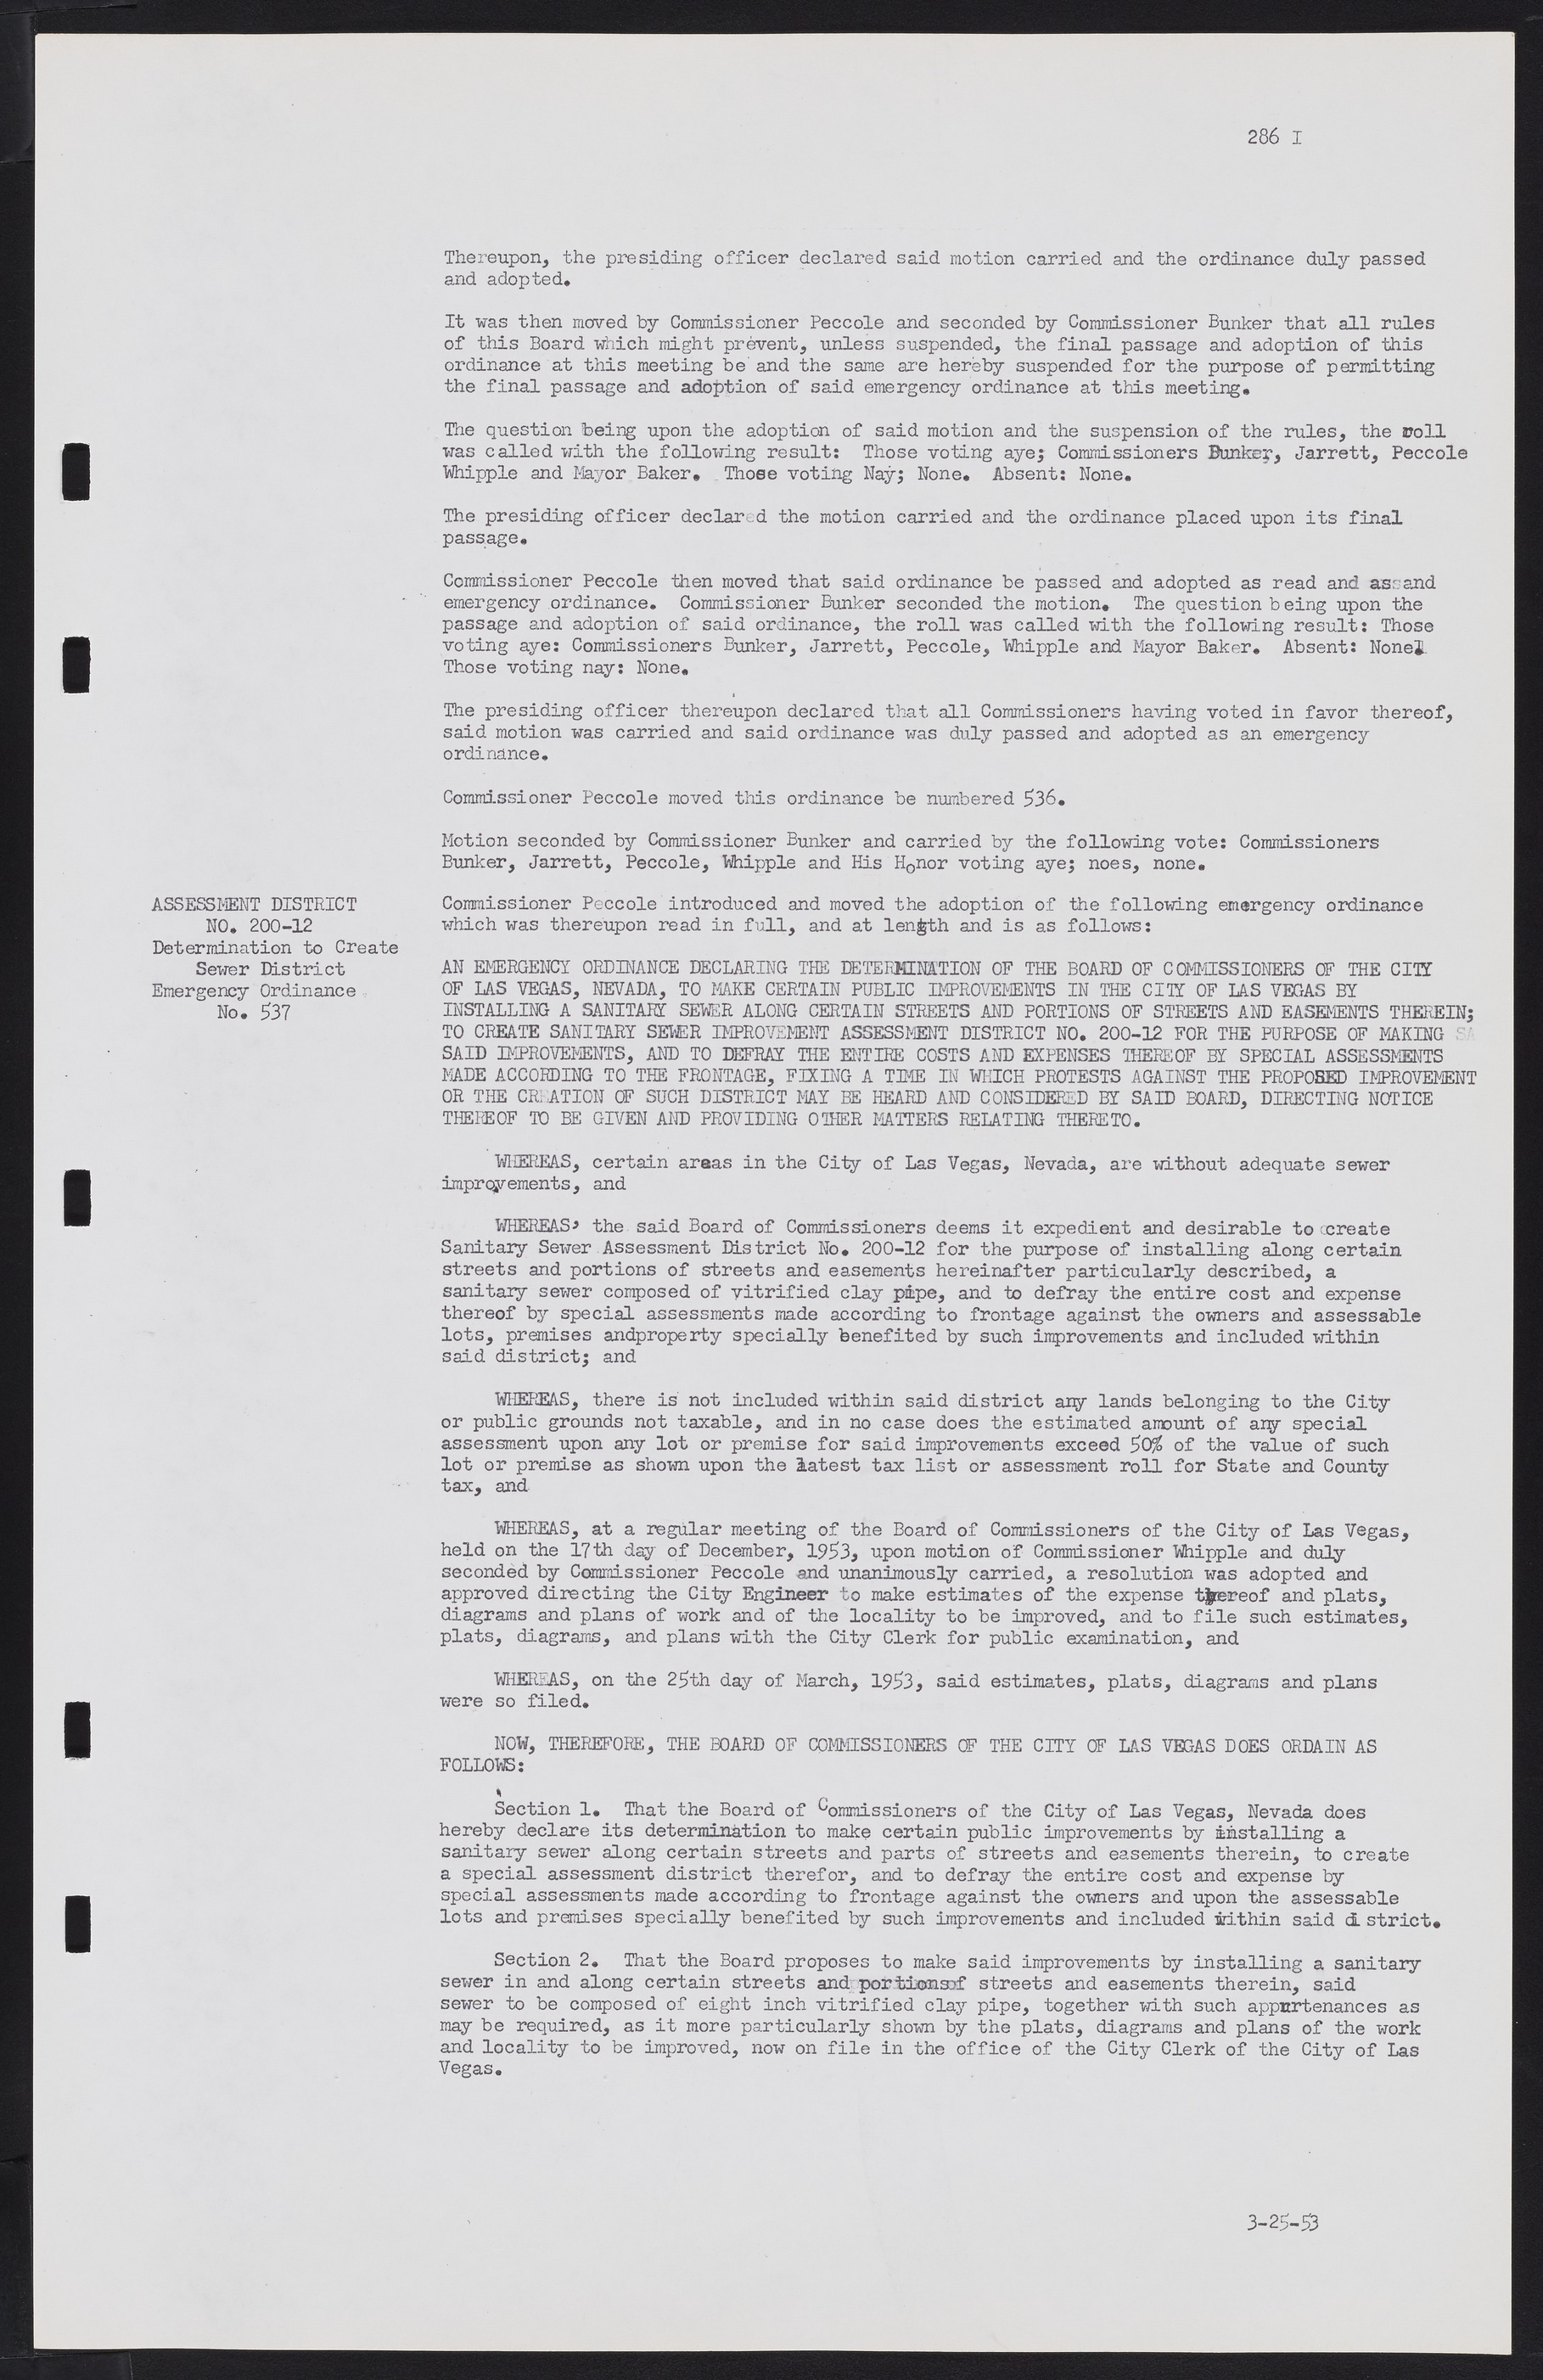 Las Vegas City Commission Minutes, May 26, 1952 to February 17, 1954, lvc000008-311